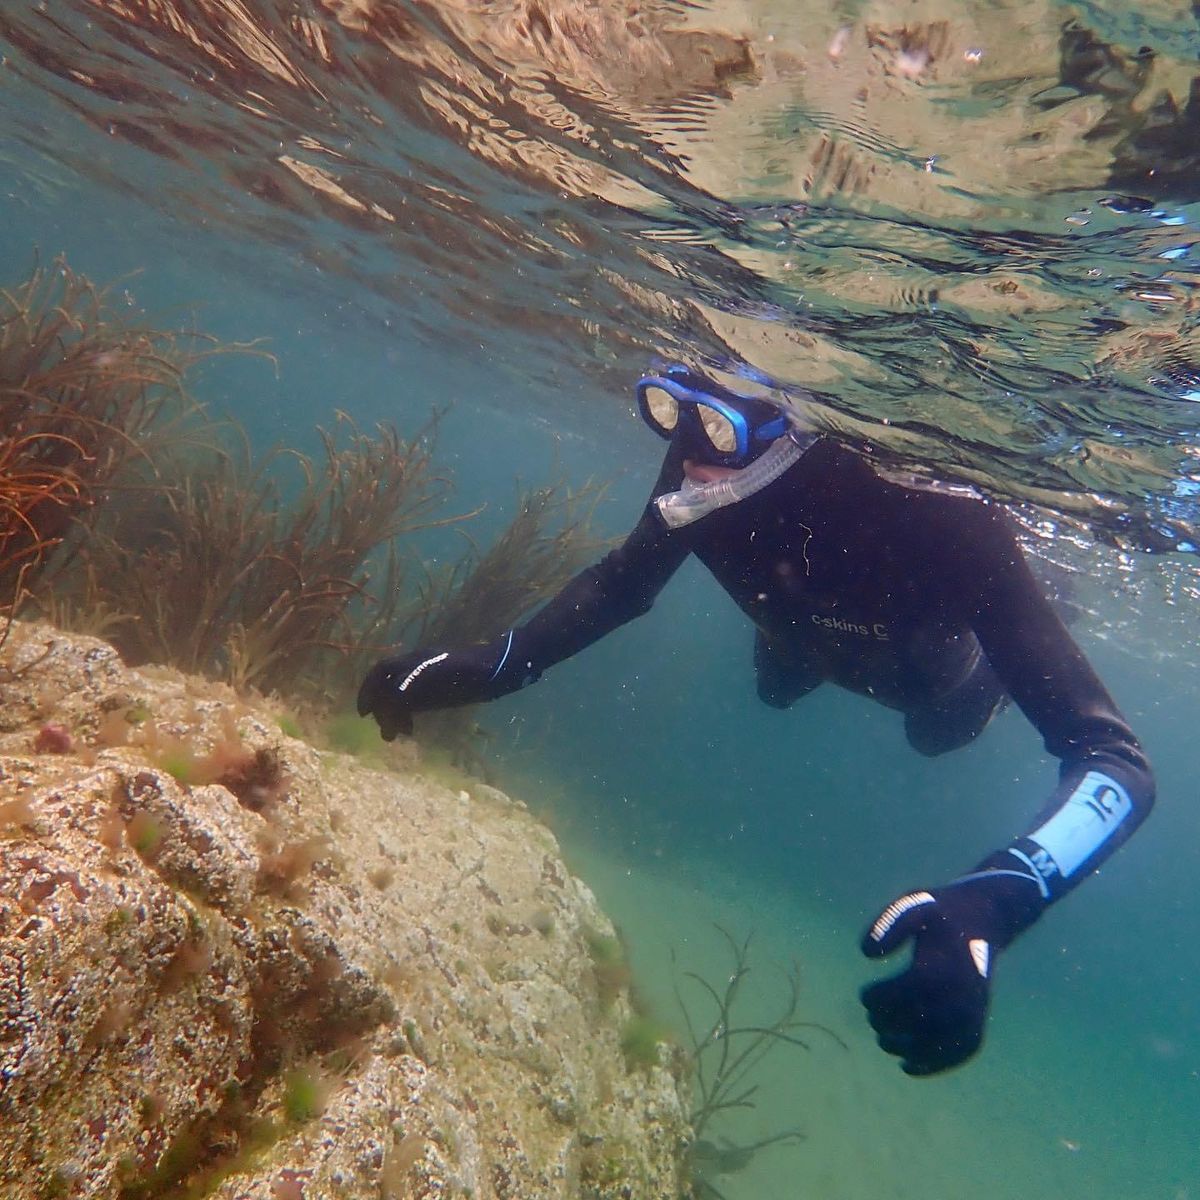 Discover Snorkelling for Beginners - Coldingham Bay, Scotland